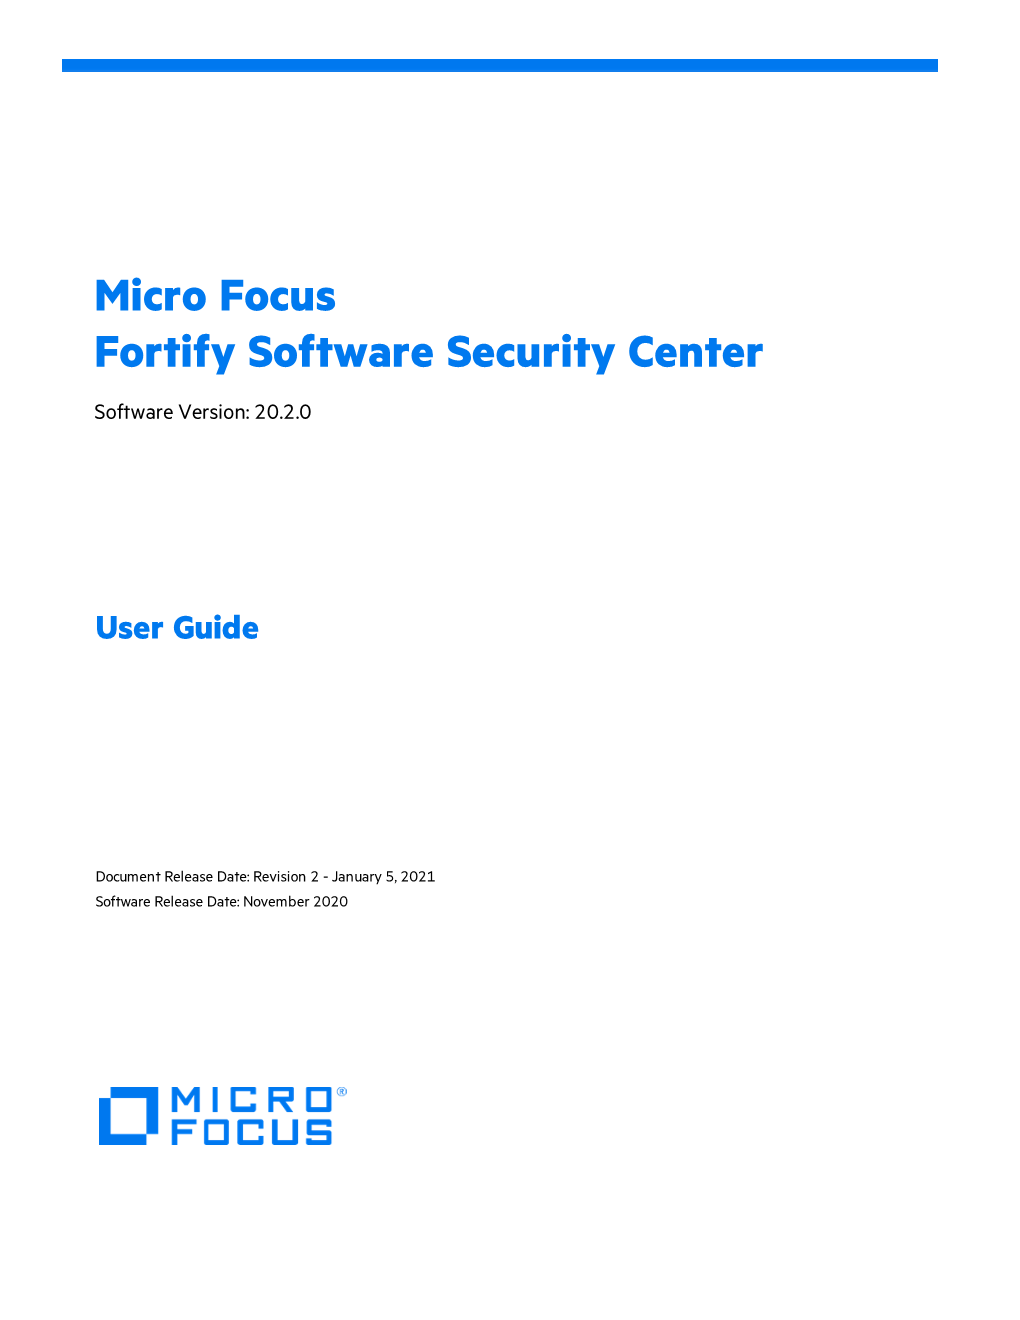 Micro Focus Fortify Software Security Center User Guide